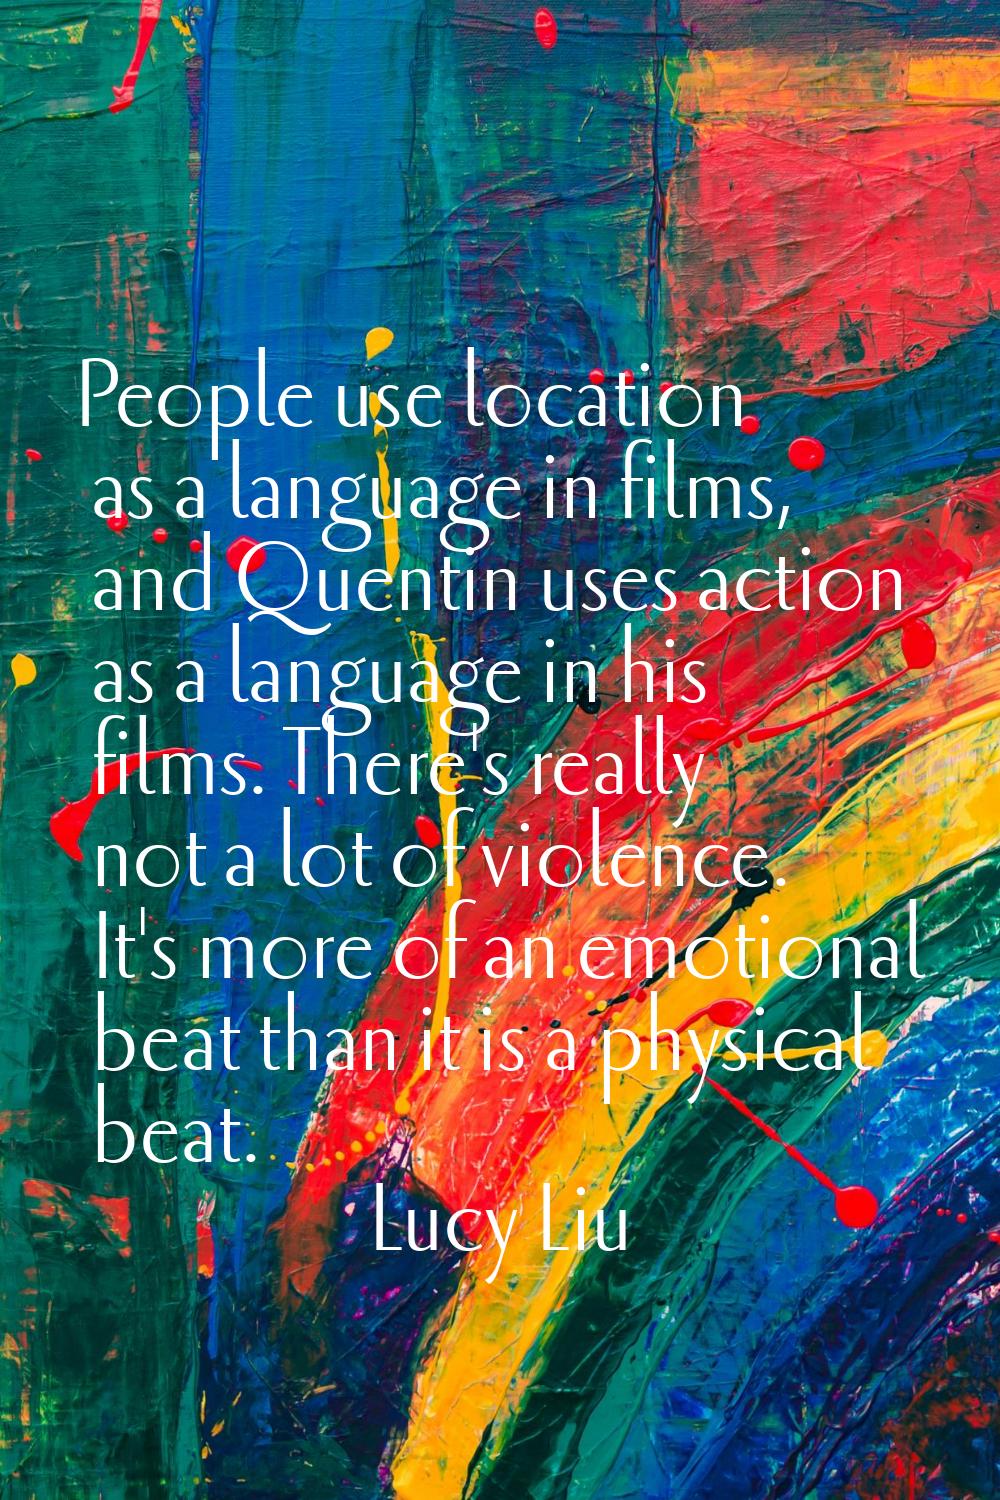 People use location as a language in films, and Quentin uses action as a language in his films. The